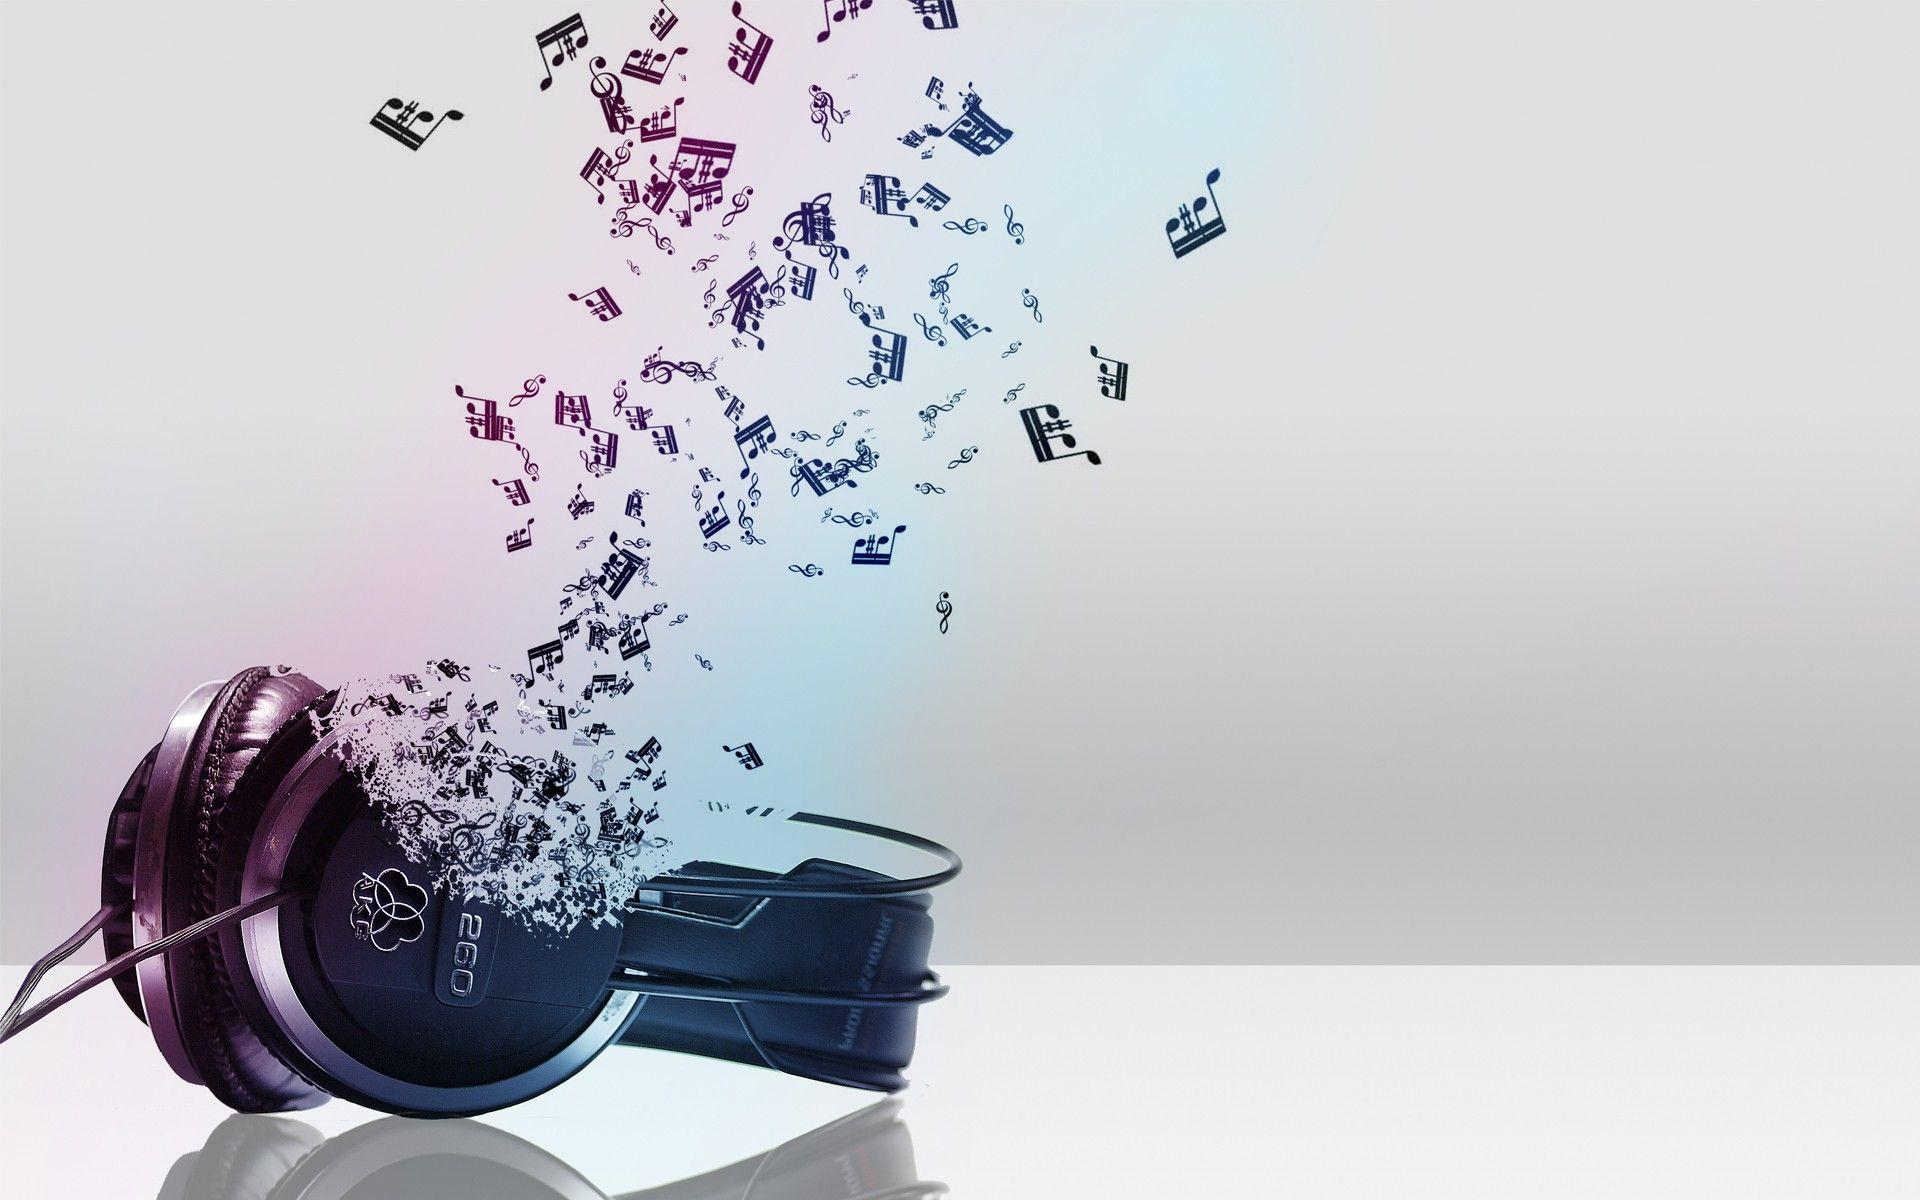 Download the Music From Headphones Wallpaper, Music From Headphones